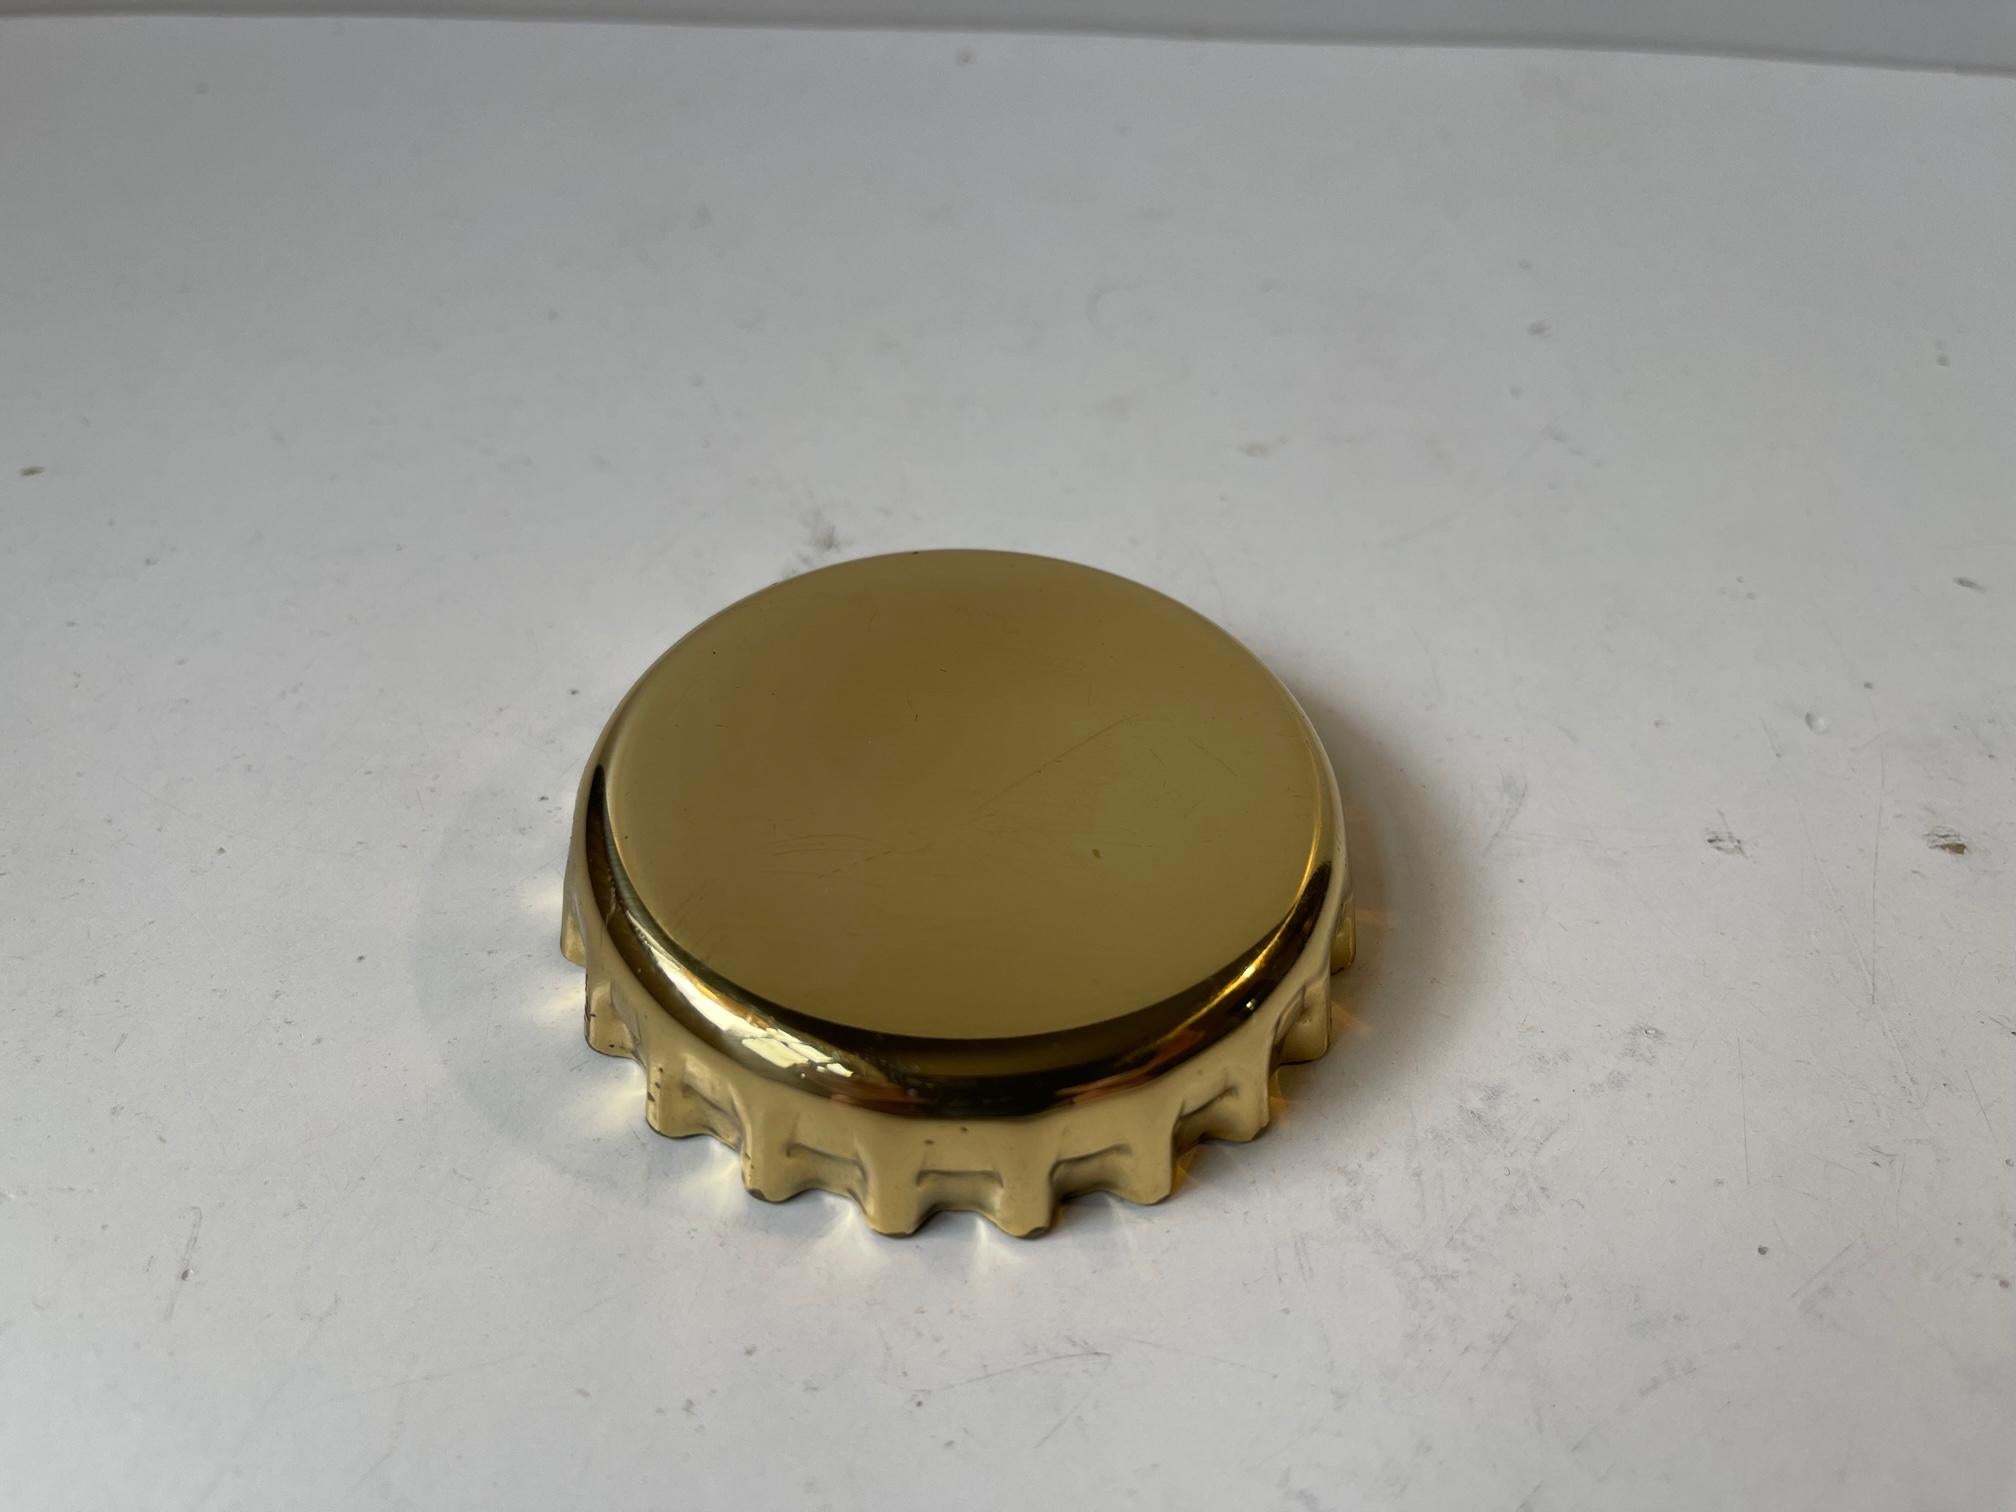 Manufactured in 1981 this curious bottle cap shaped opener is made from sculpted brass with a 'opener' mechanism in stainless steel. It is signed to the inside: Georg Jensen Design, Denmark, 1981.